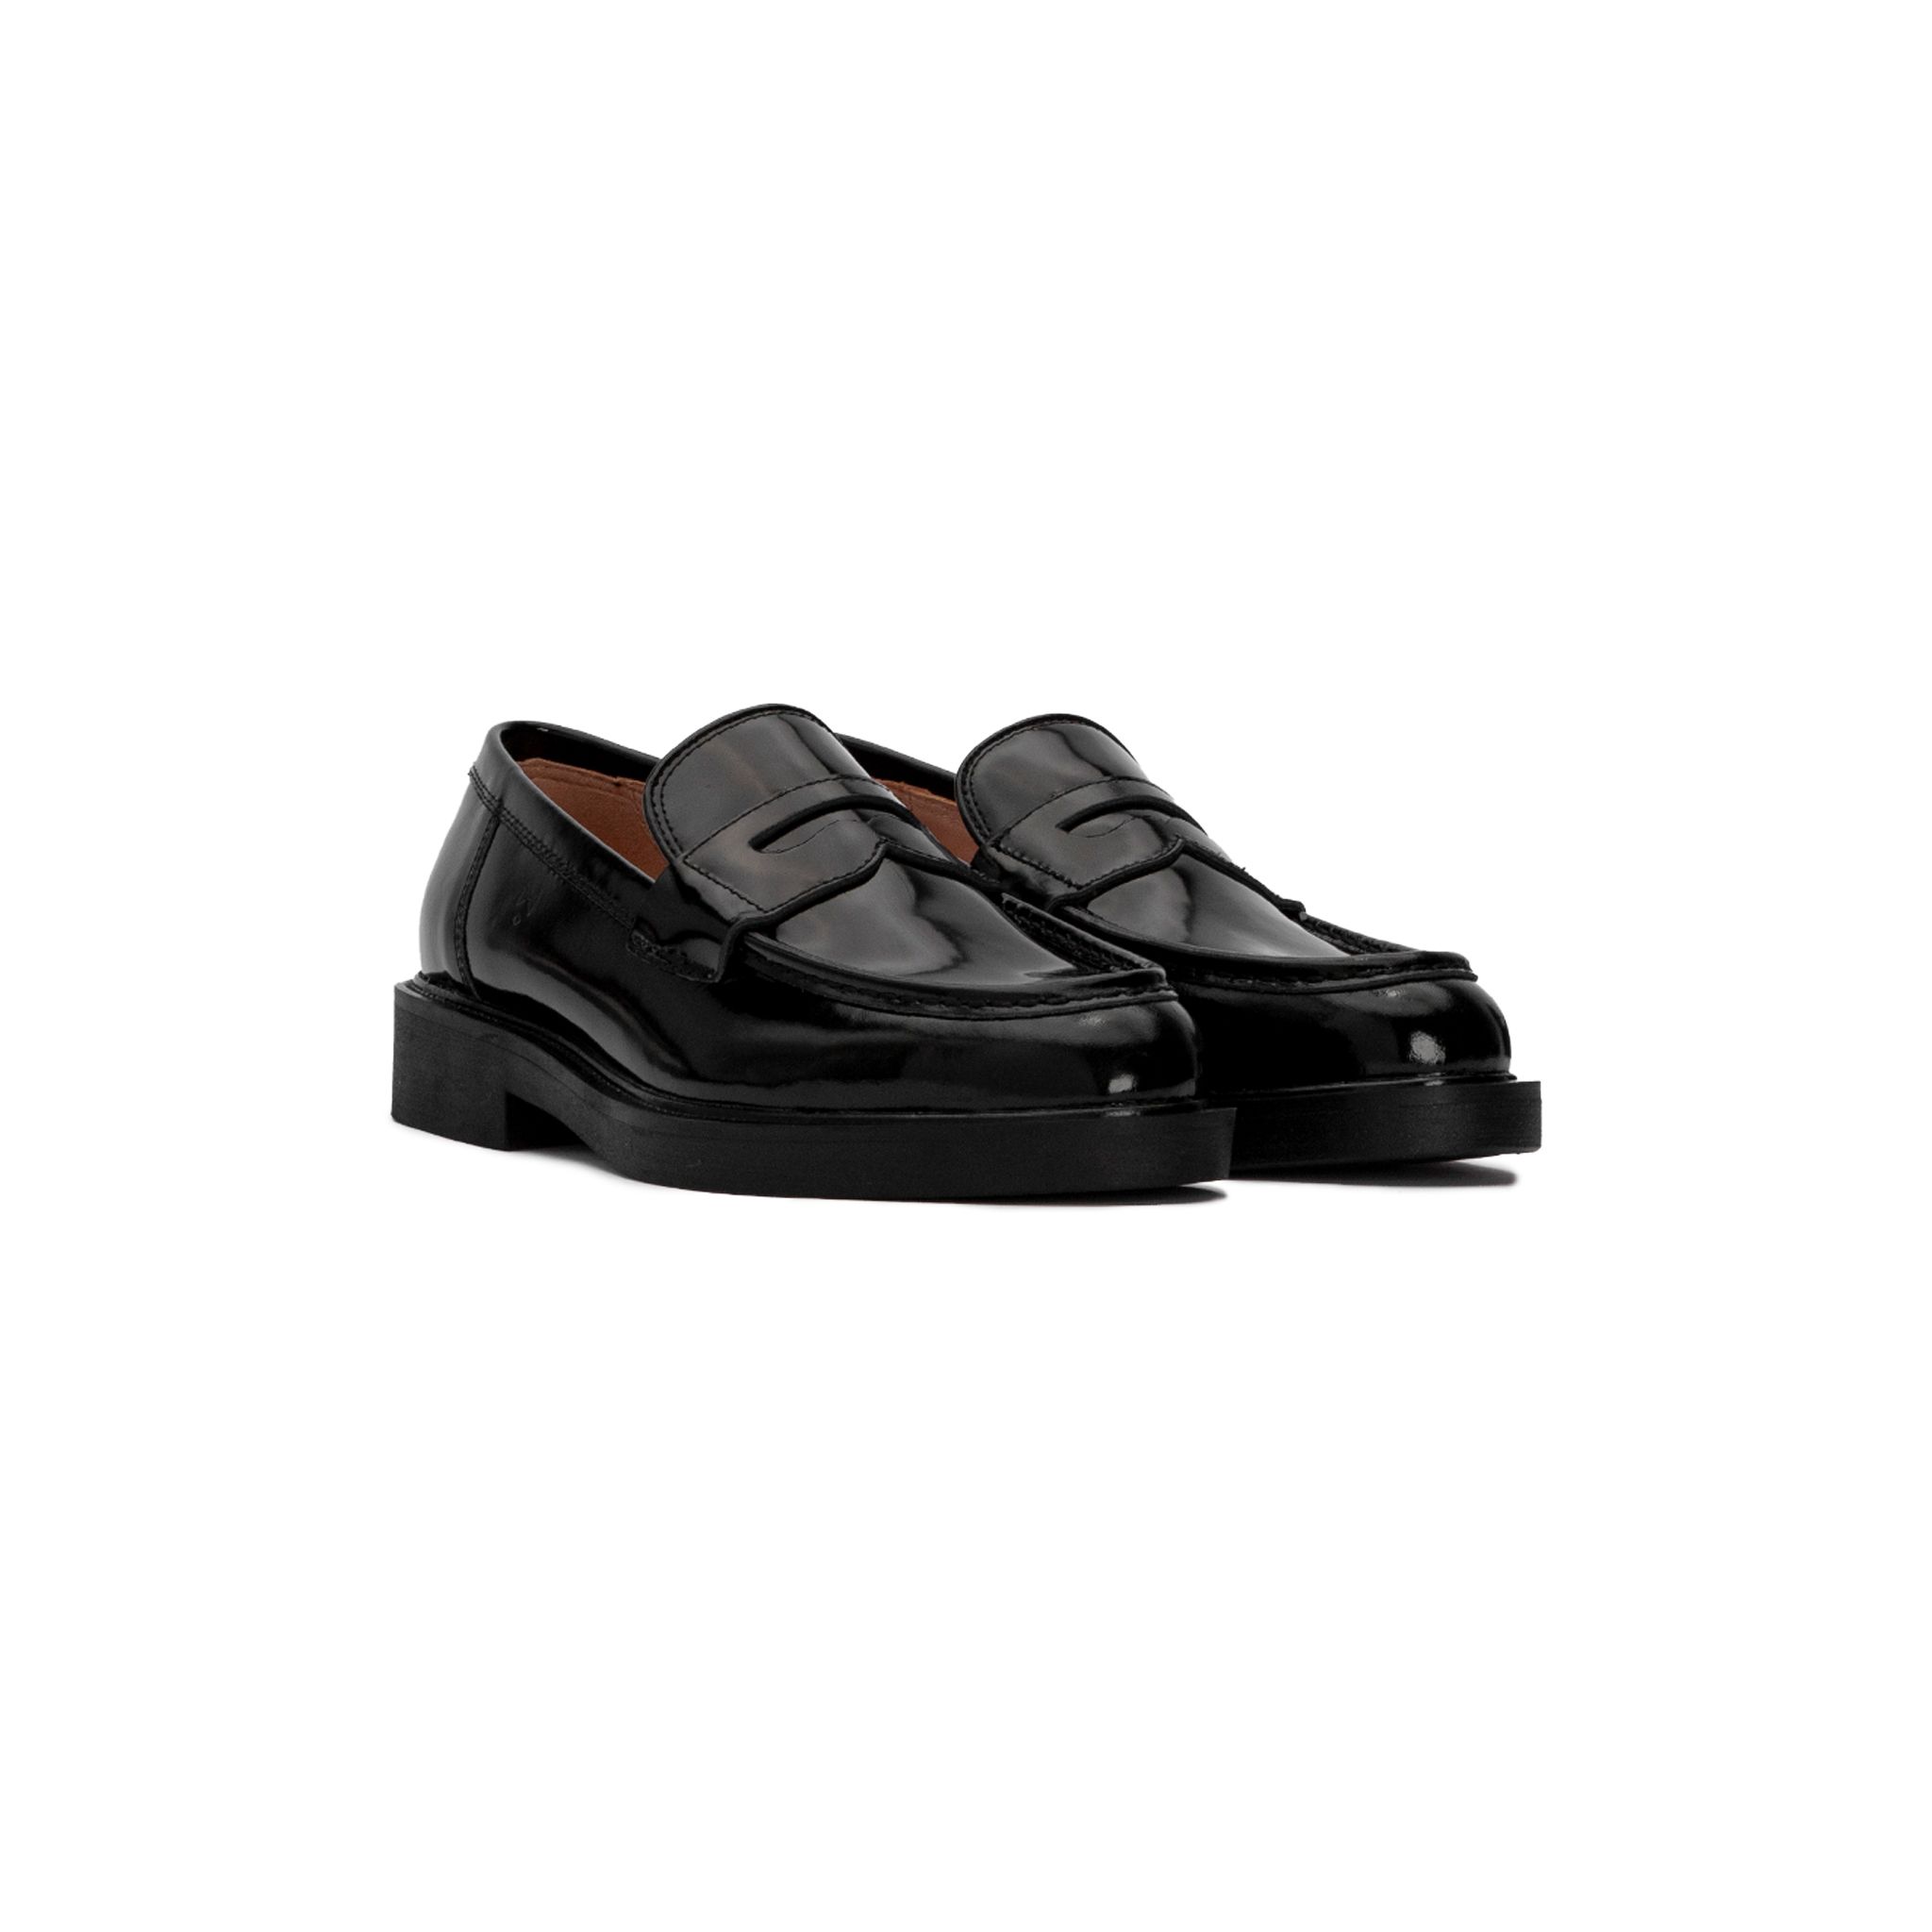  THE SEAN WOLF PENNY LOAFER - SHINY BLACK 